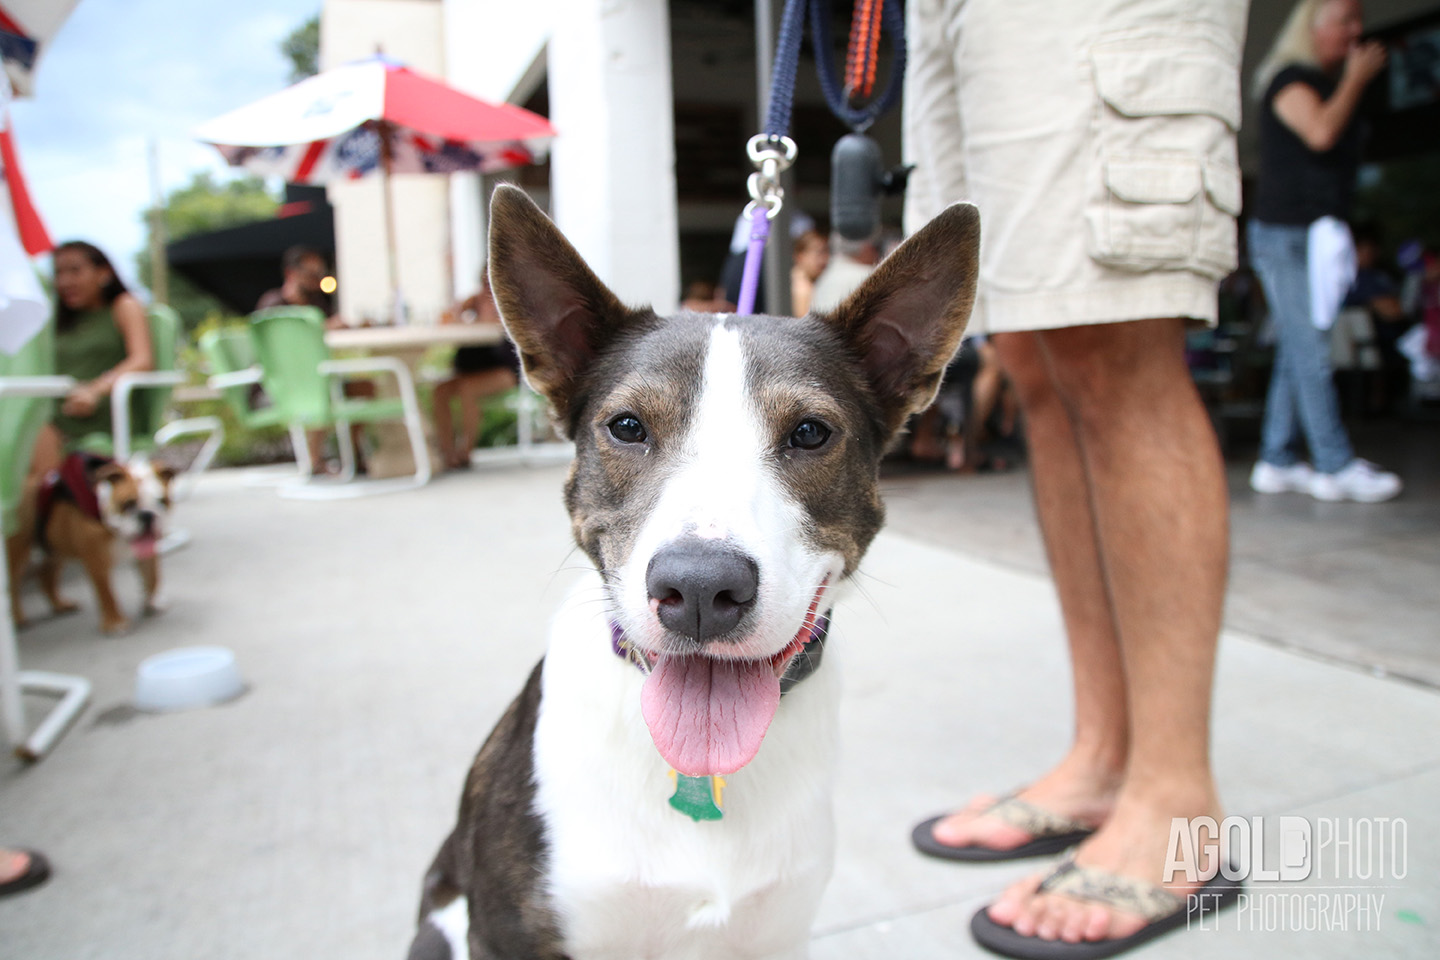 Seminole Heights Pup Crawl_AGoldPhoto Pet Photography_10